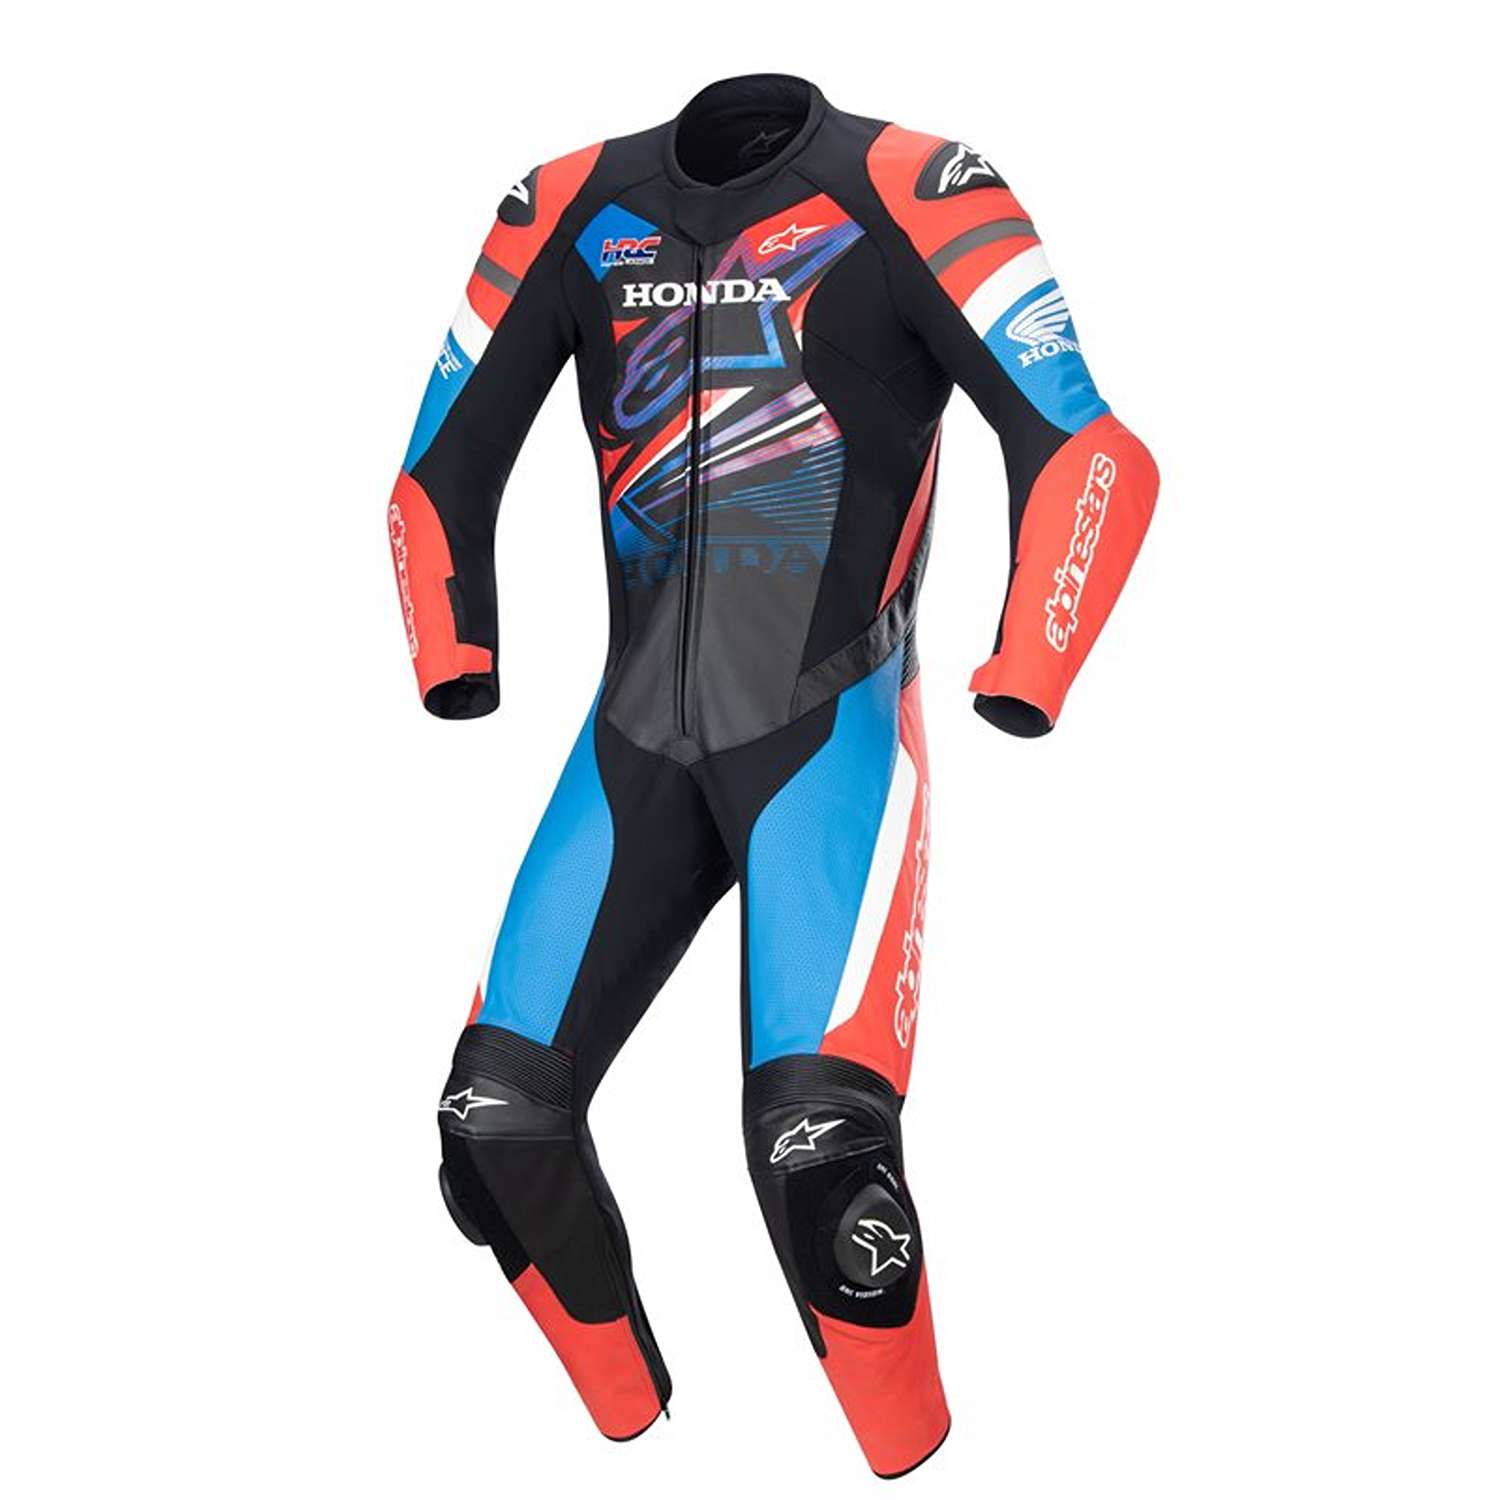 Image of EU Alpinestars Honda Gp Force Leather Suit Black Bright Red Blue Taille 50